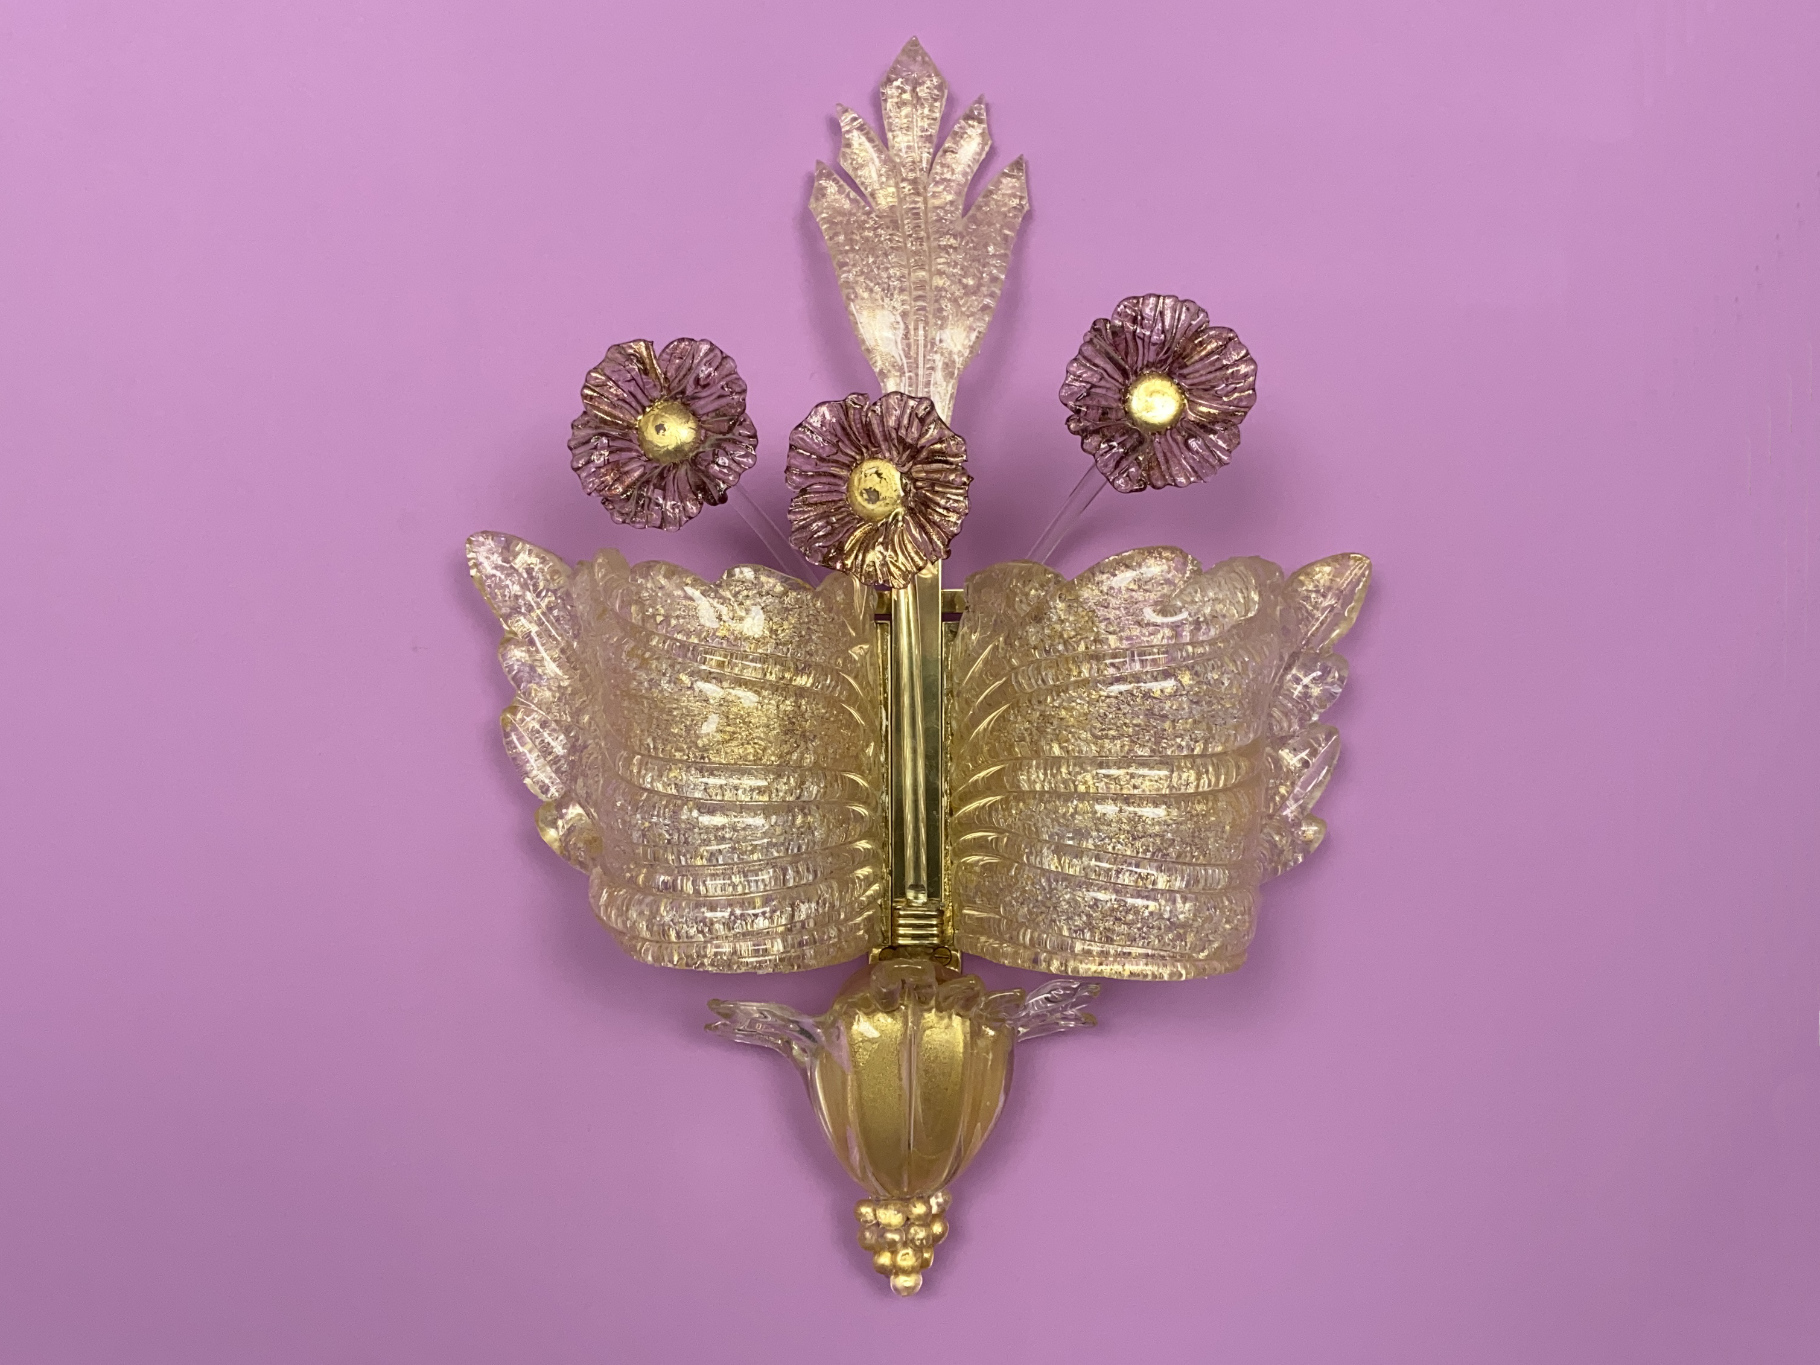 “Grand Hotel“ Sconce by Barovier & Toso, Murano, Italy, 1950s. Glass from Murano, Venice with Gold Dust and purple-colored Glass Flowers.